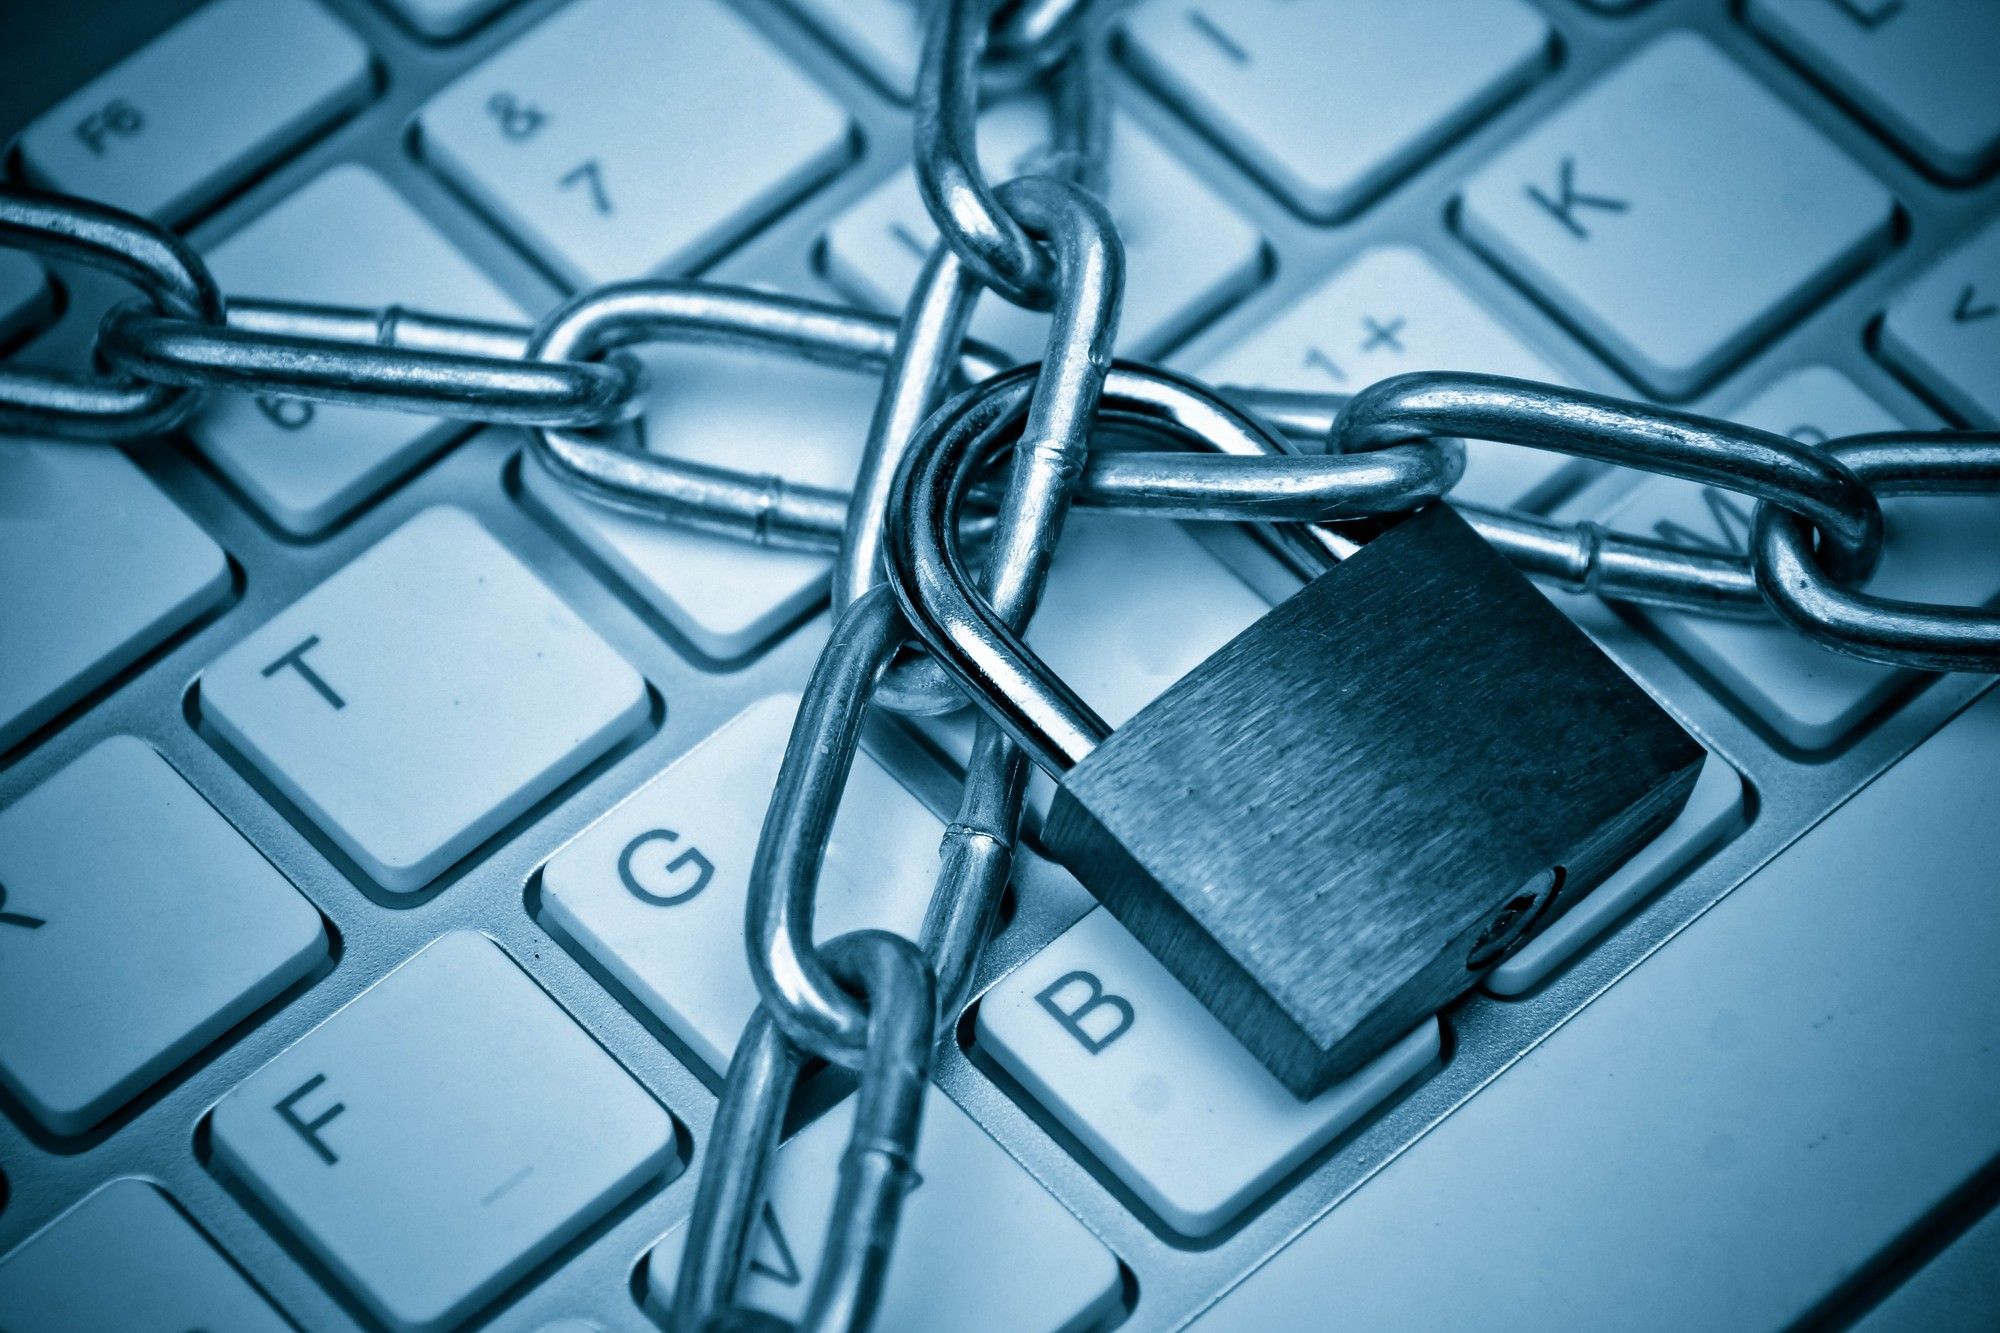 Chains locked with a padlock over a computer keyboard - railworks data breach